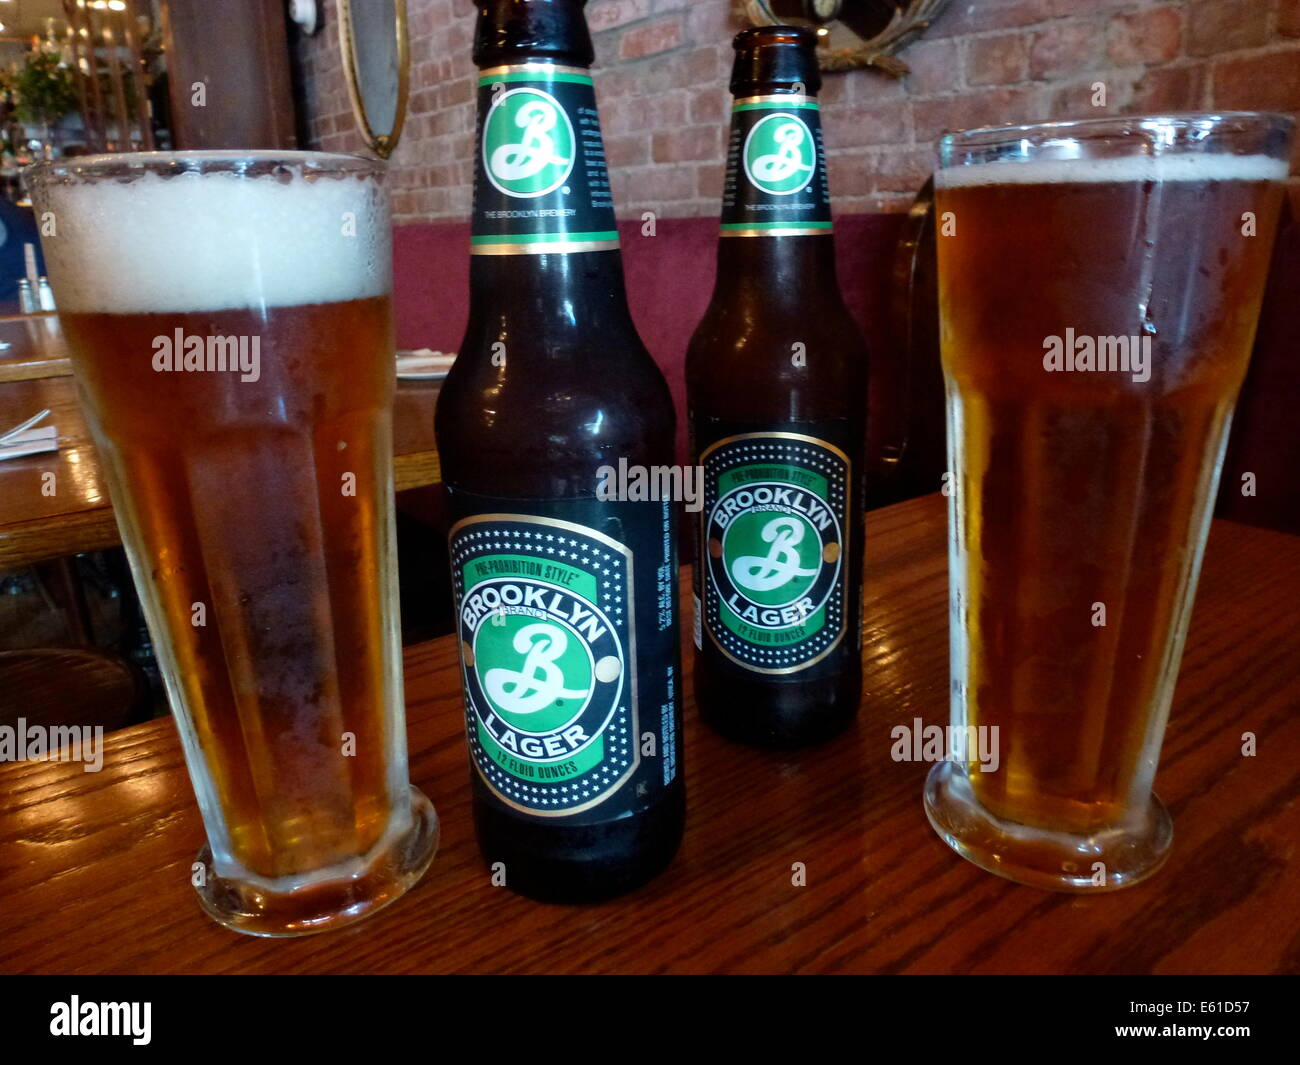 Two beer glasses and beer bottles with Brooklyn Lager Beer of the Brooklyn Brewery in New York, USA, 24 June 2014. The logo of the brewery was designed by Milton Glaser, who also designed the 'I love NY' logo. Photo: Alexandra Schuler/dpa - ATTENTION! NO WIRE SERVICE - Stock Photo